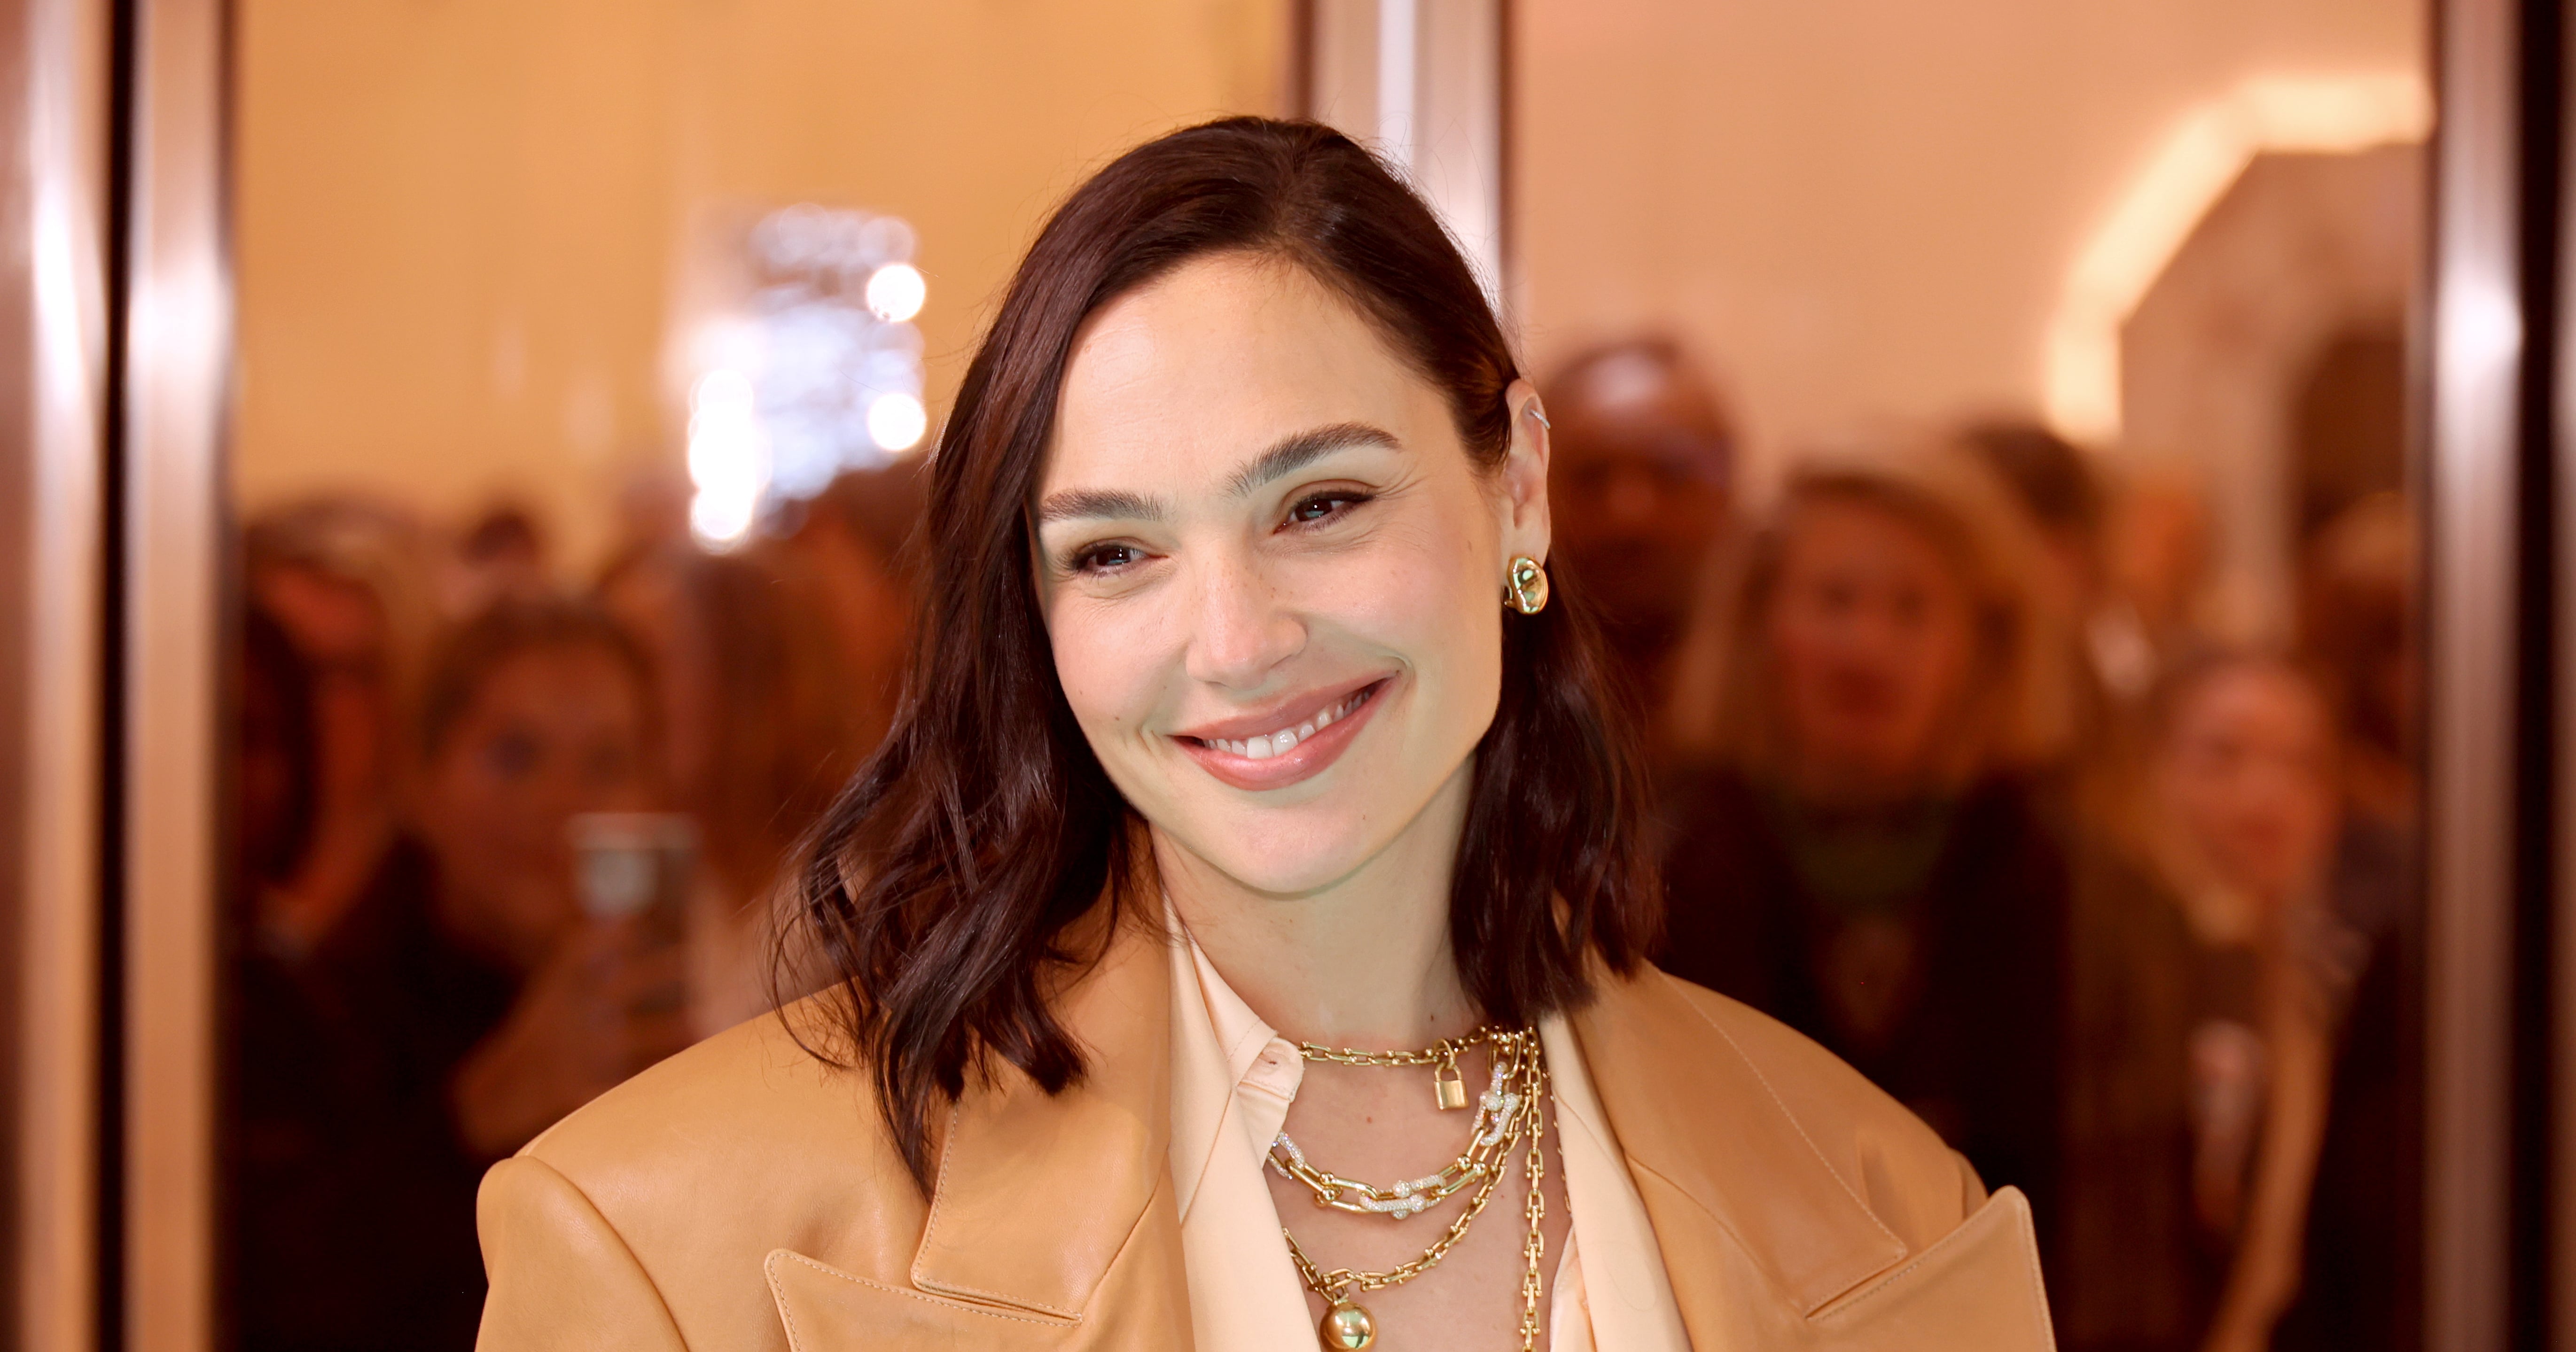 Gal Gadot Says Balancing Her Career and Raising 3 Kids Is the Most “Badass” Thing She Does